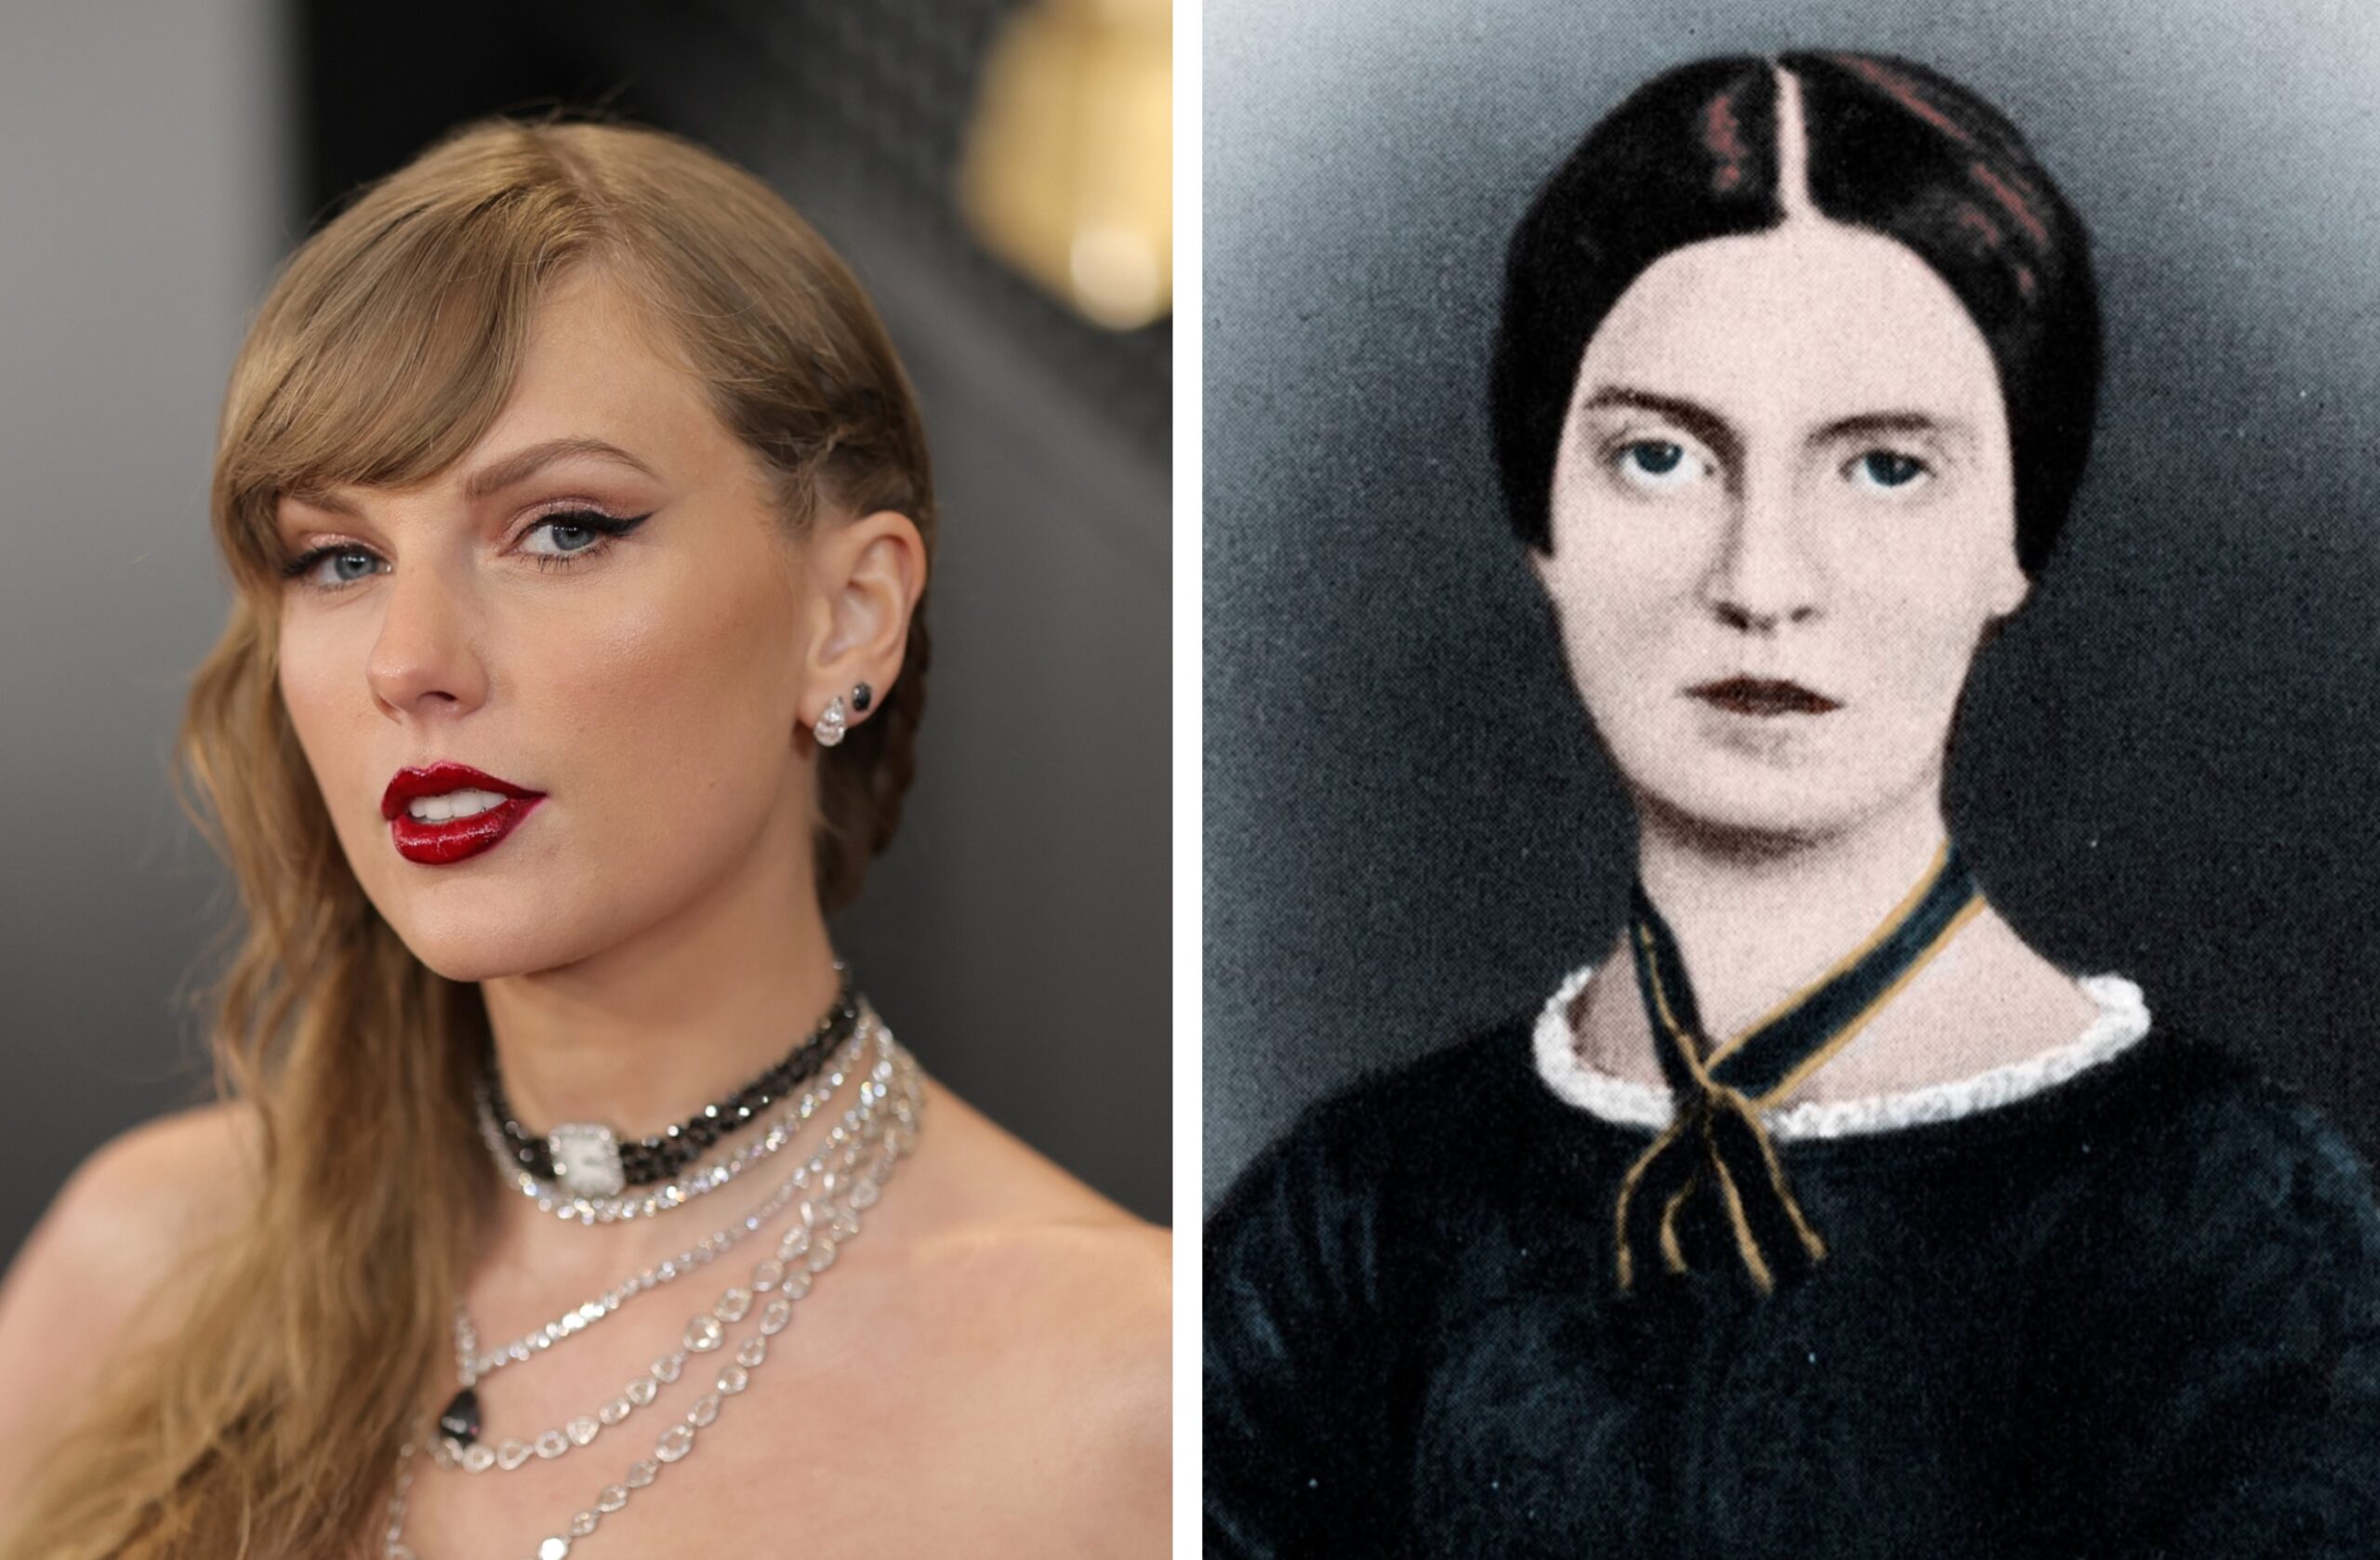 Genealogy firm discovers Taylor Swift related to poet Emily Dickinson